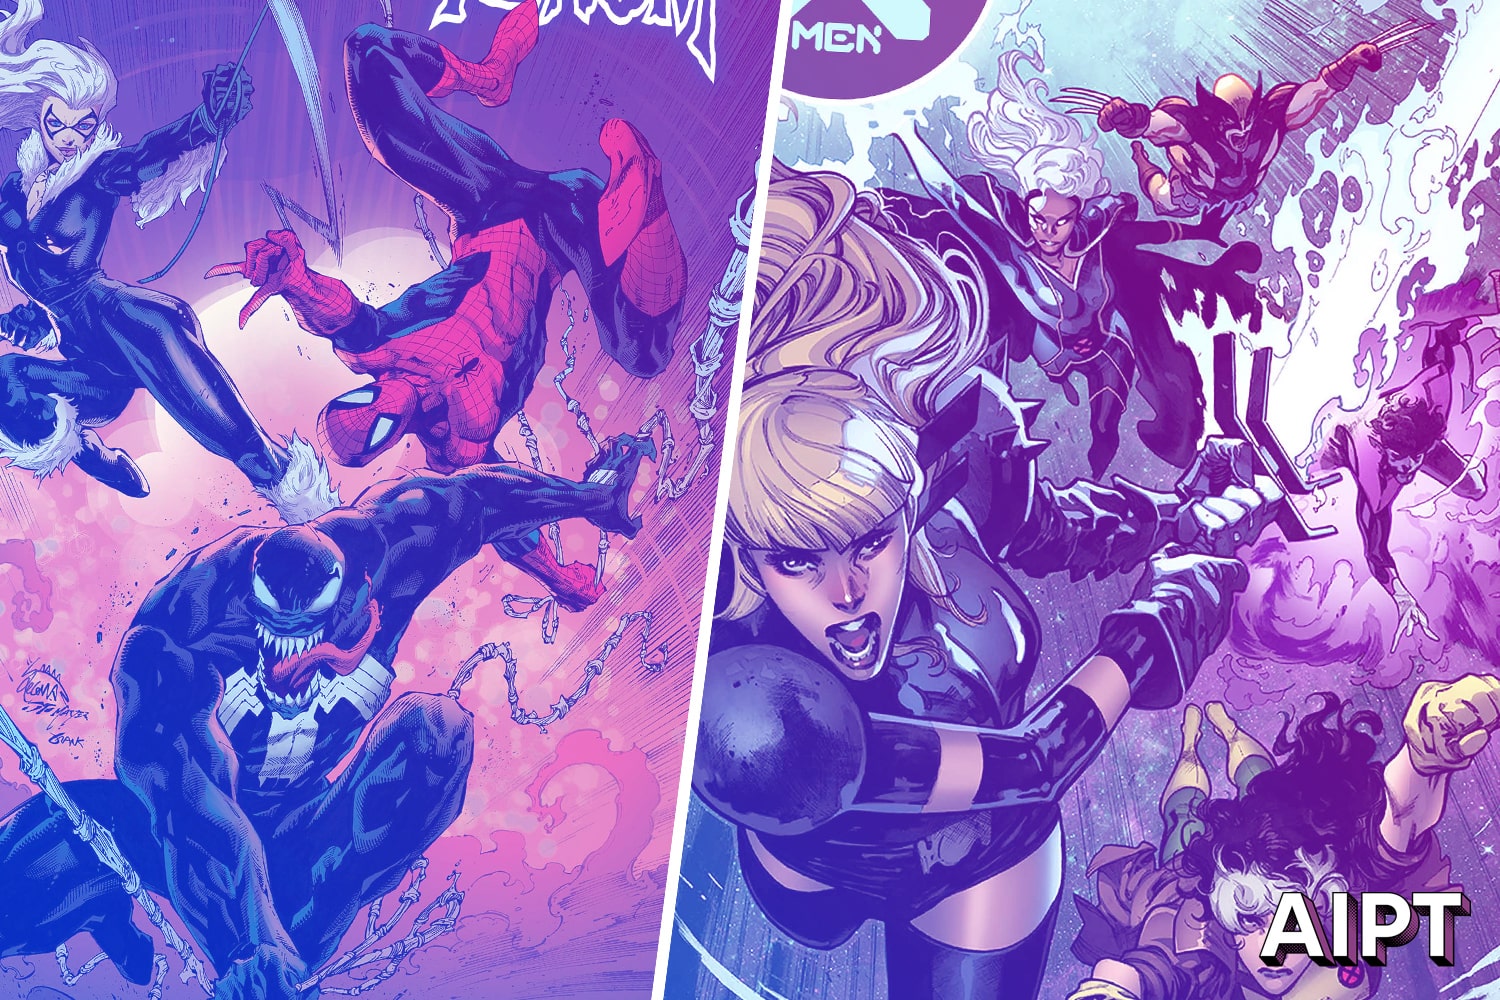 Marvel Comics shifts Free Comic Book Day X-Men to July 15 and Spider-Man/Venom to July 22